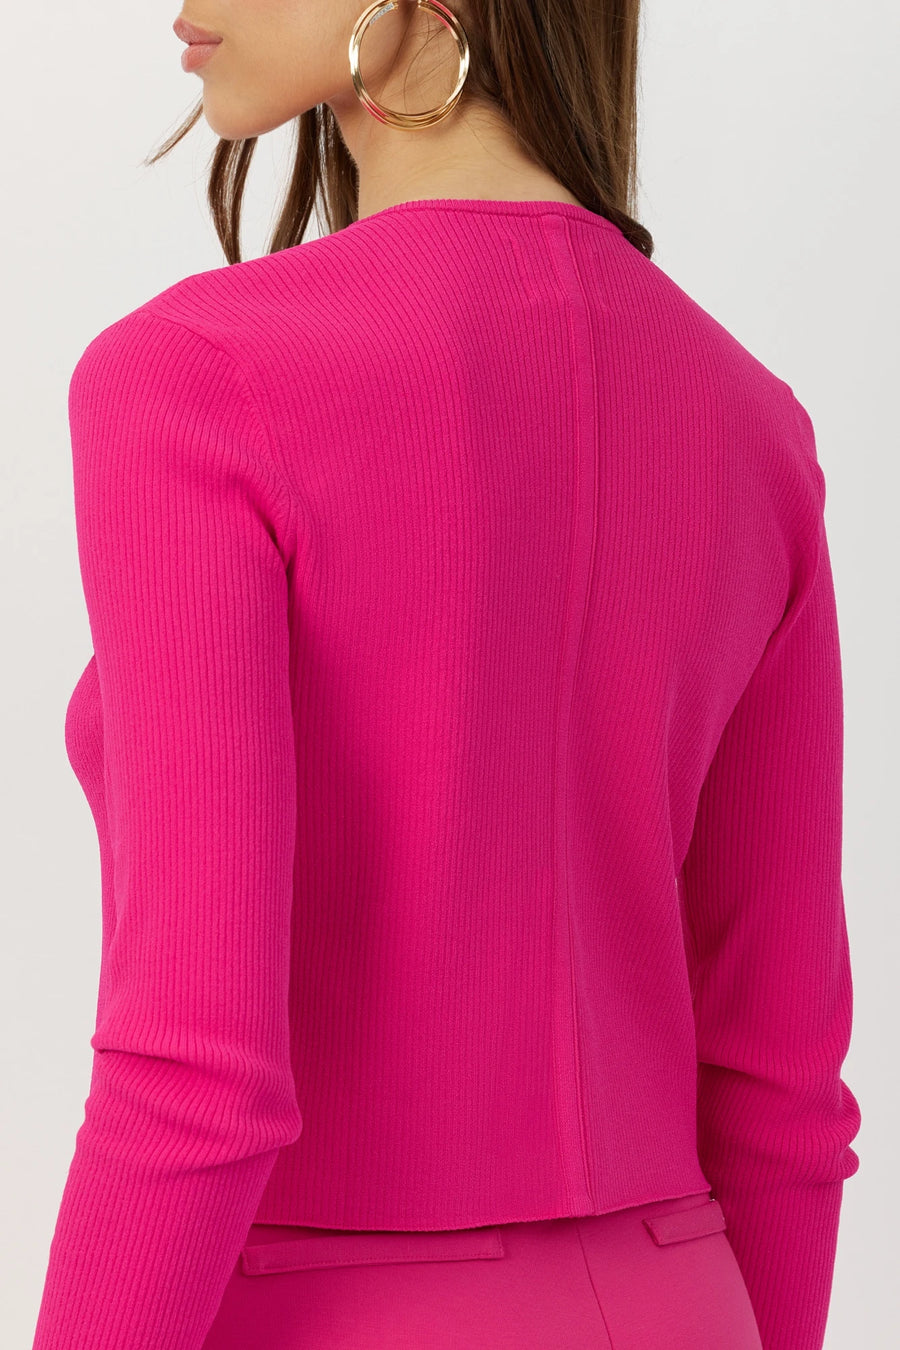 The Gemma ribbed knit cardigan in fuchsia by Greyven